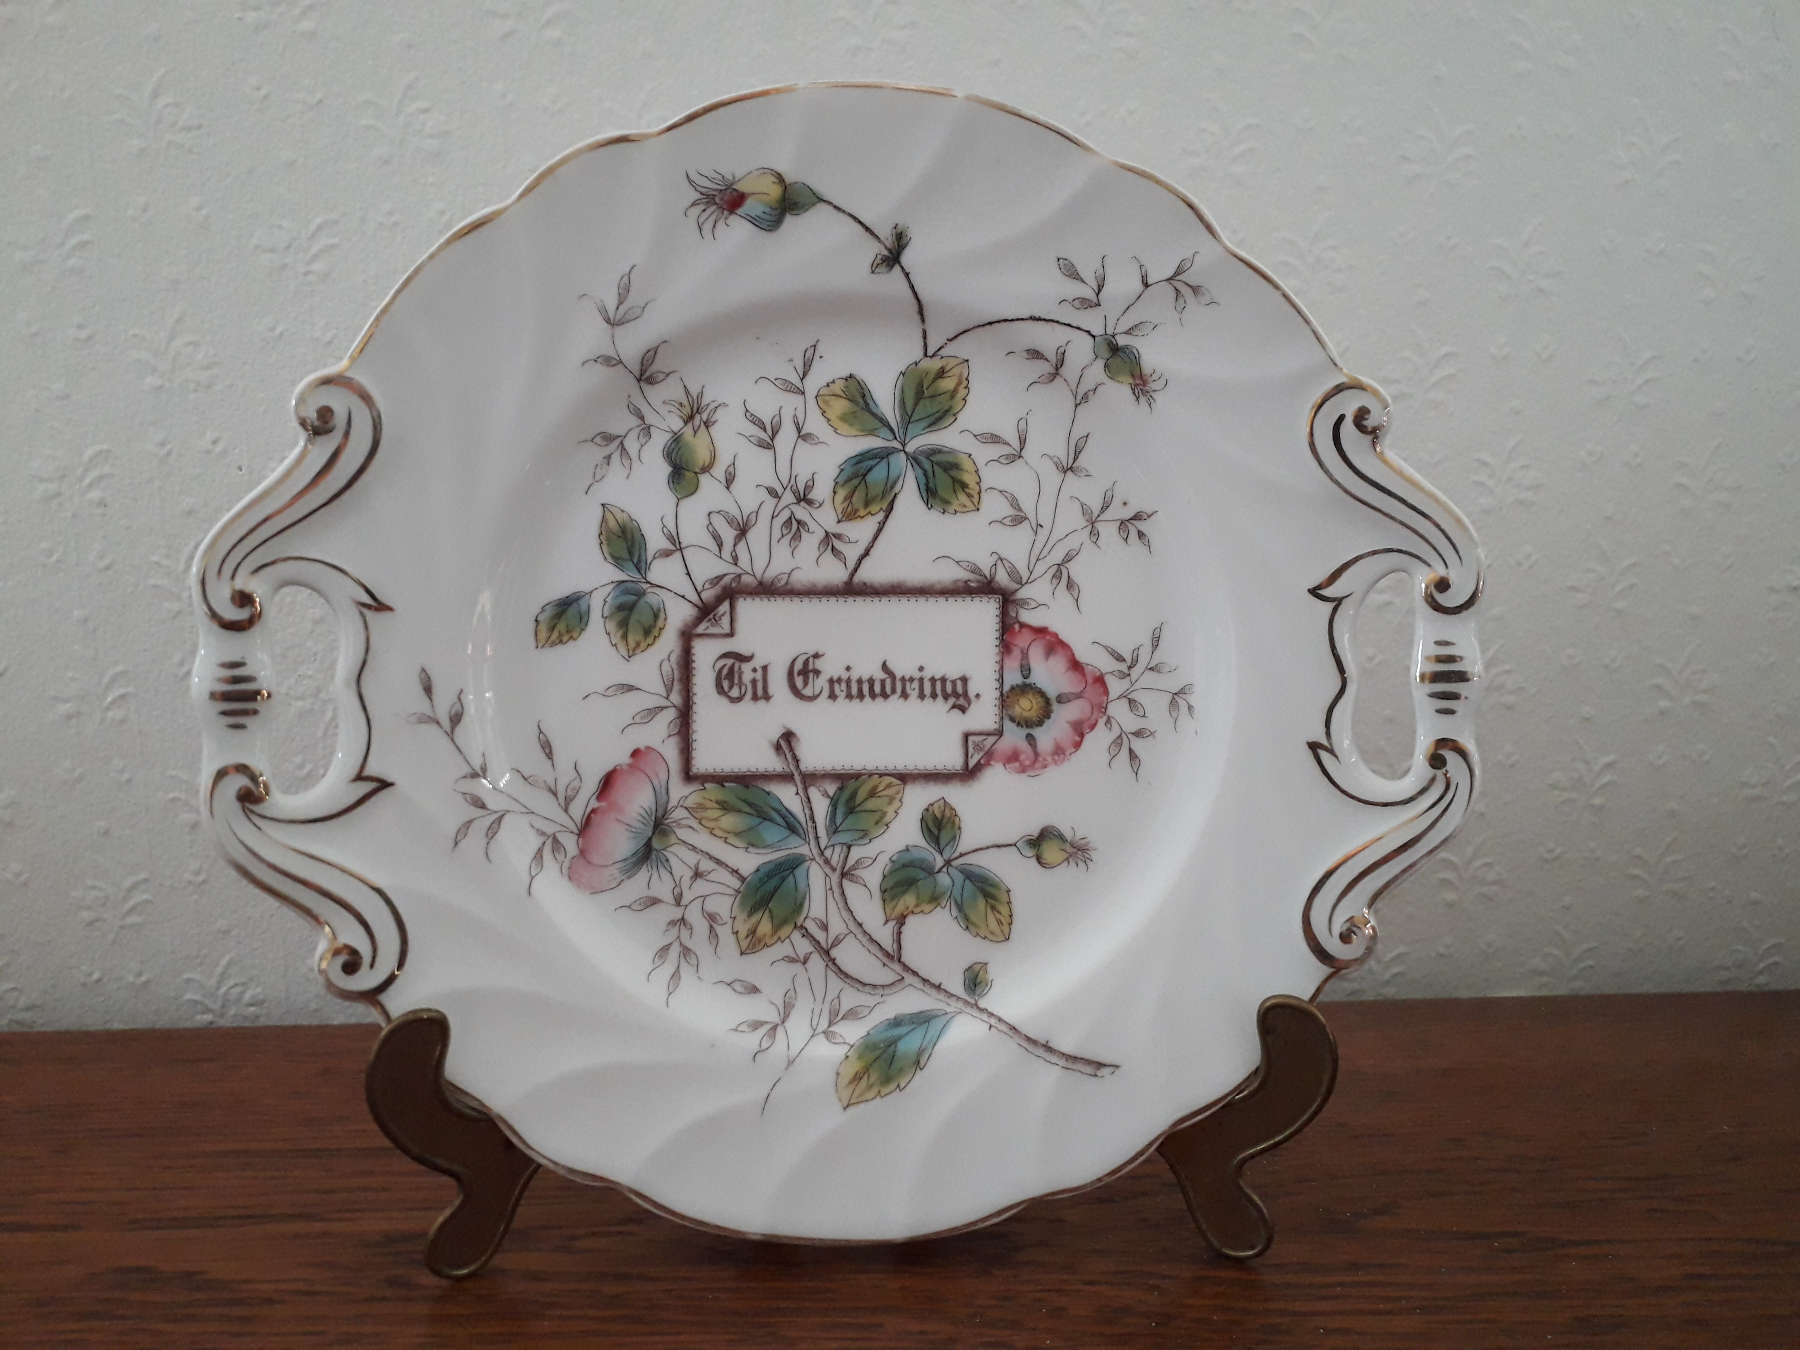 Porsgrund dish with flowers, leaves, relief and inscription 'Til Erindring'